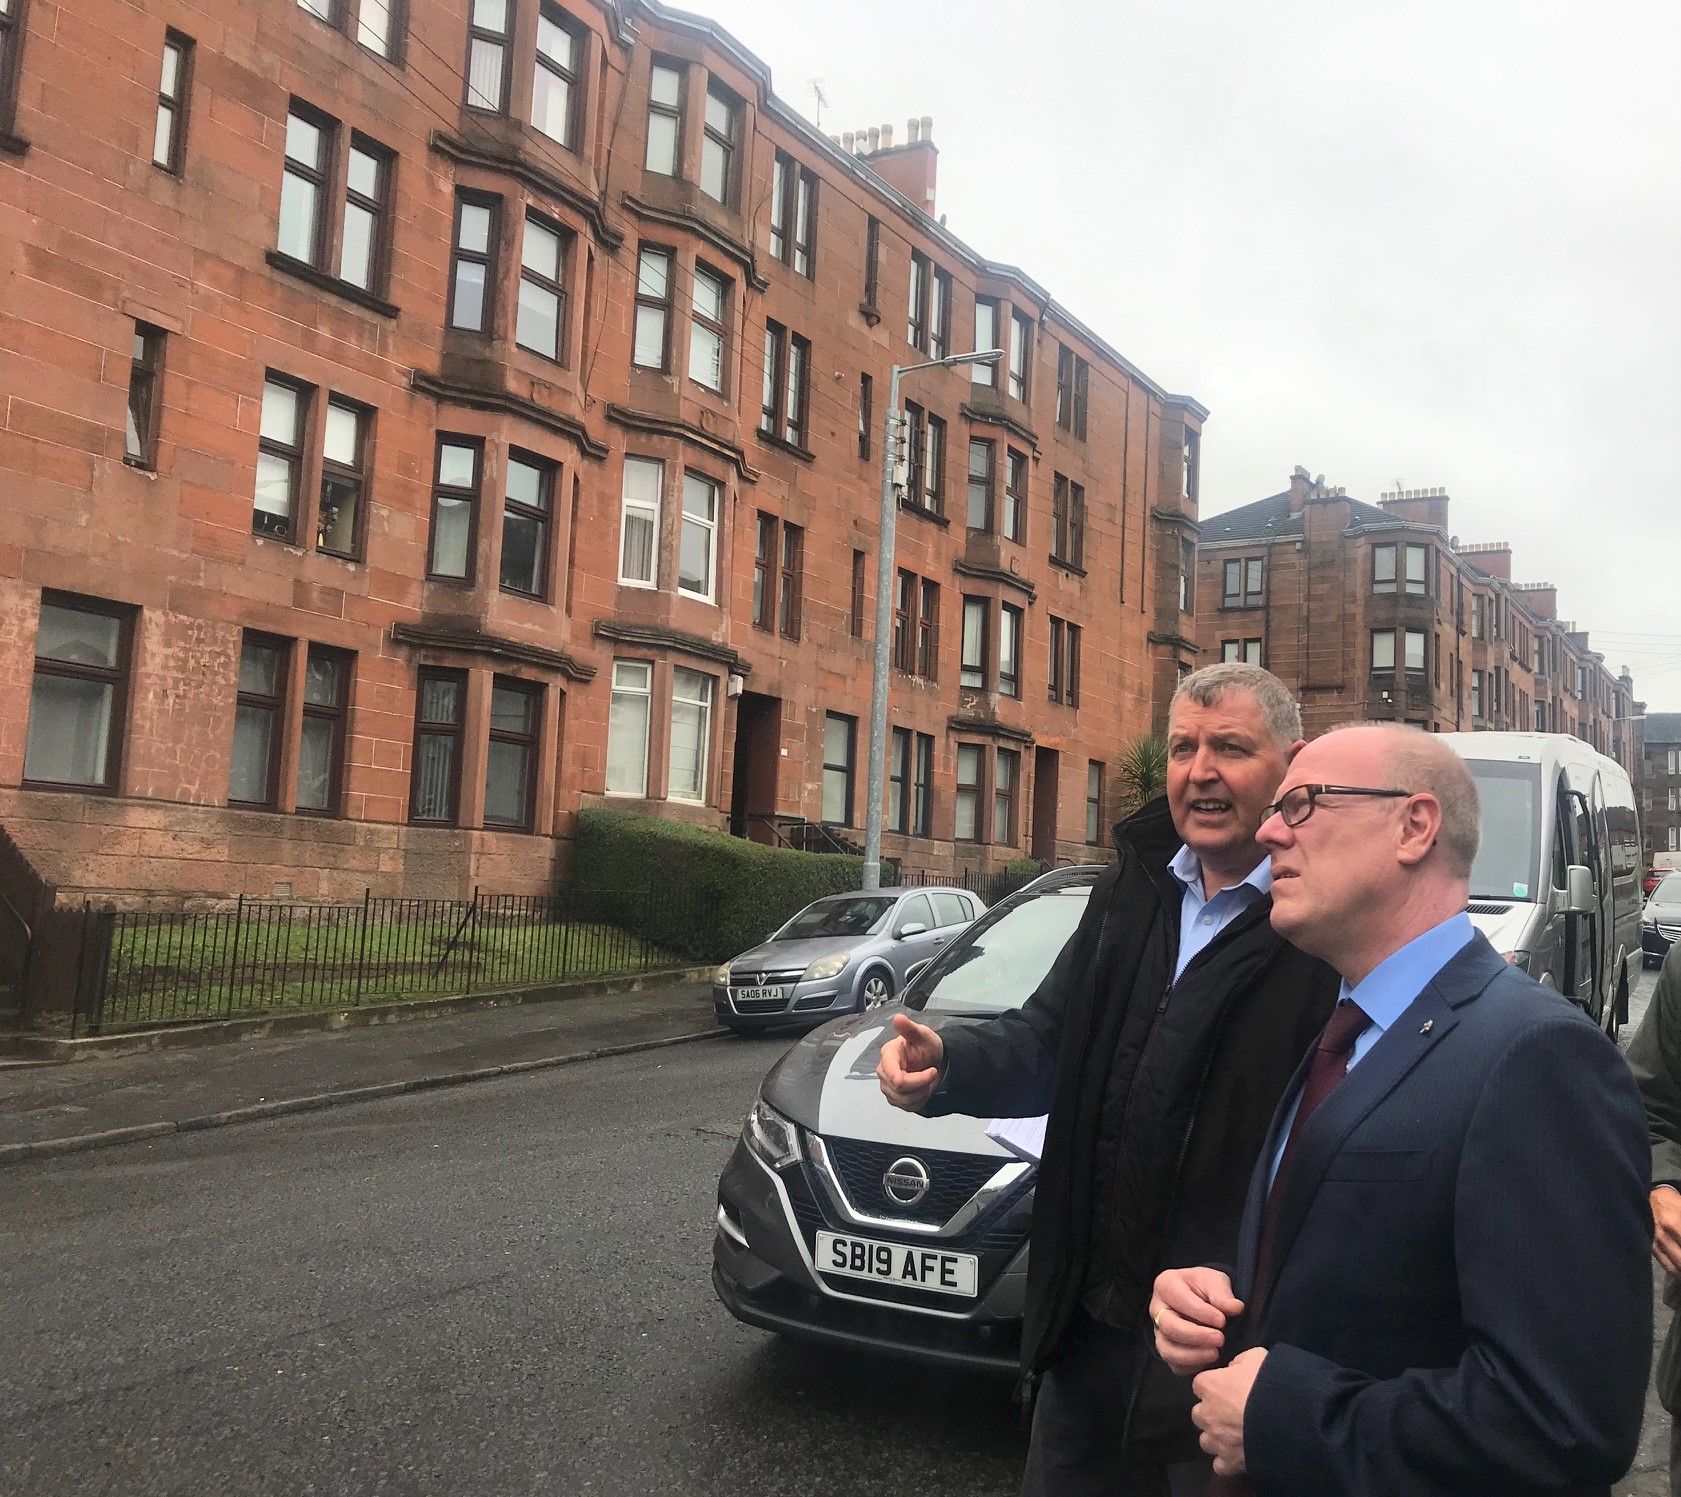 Housing minister warned of need for partnership working on private tenements